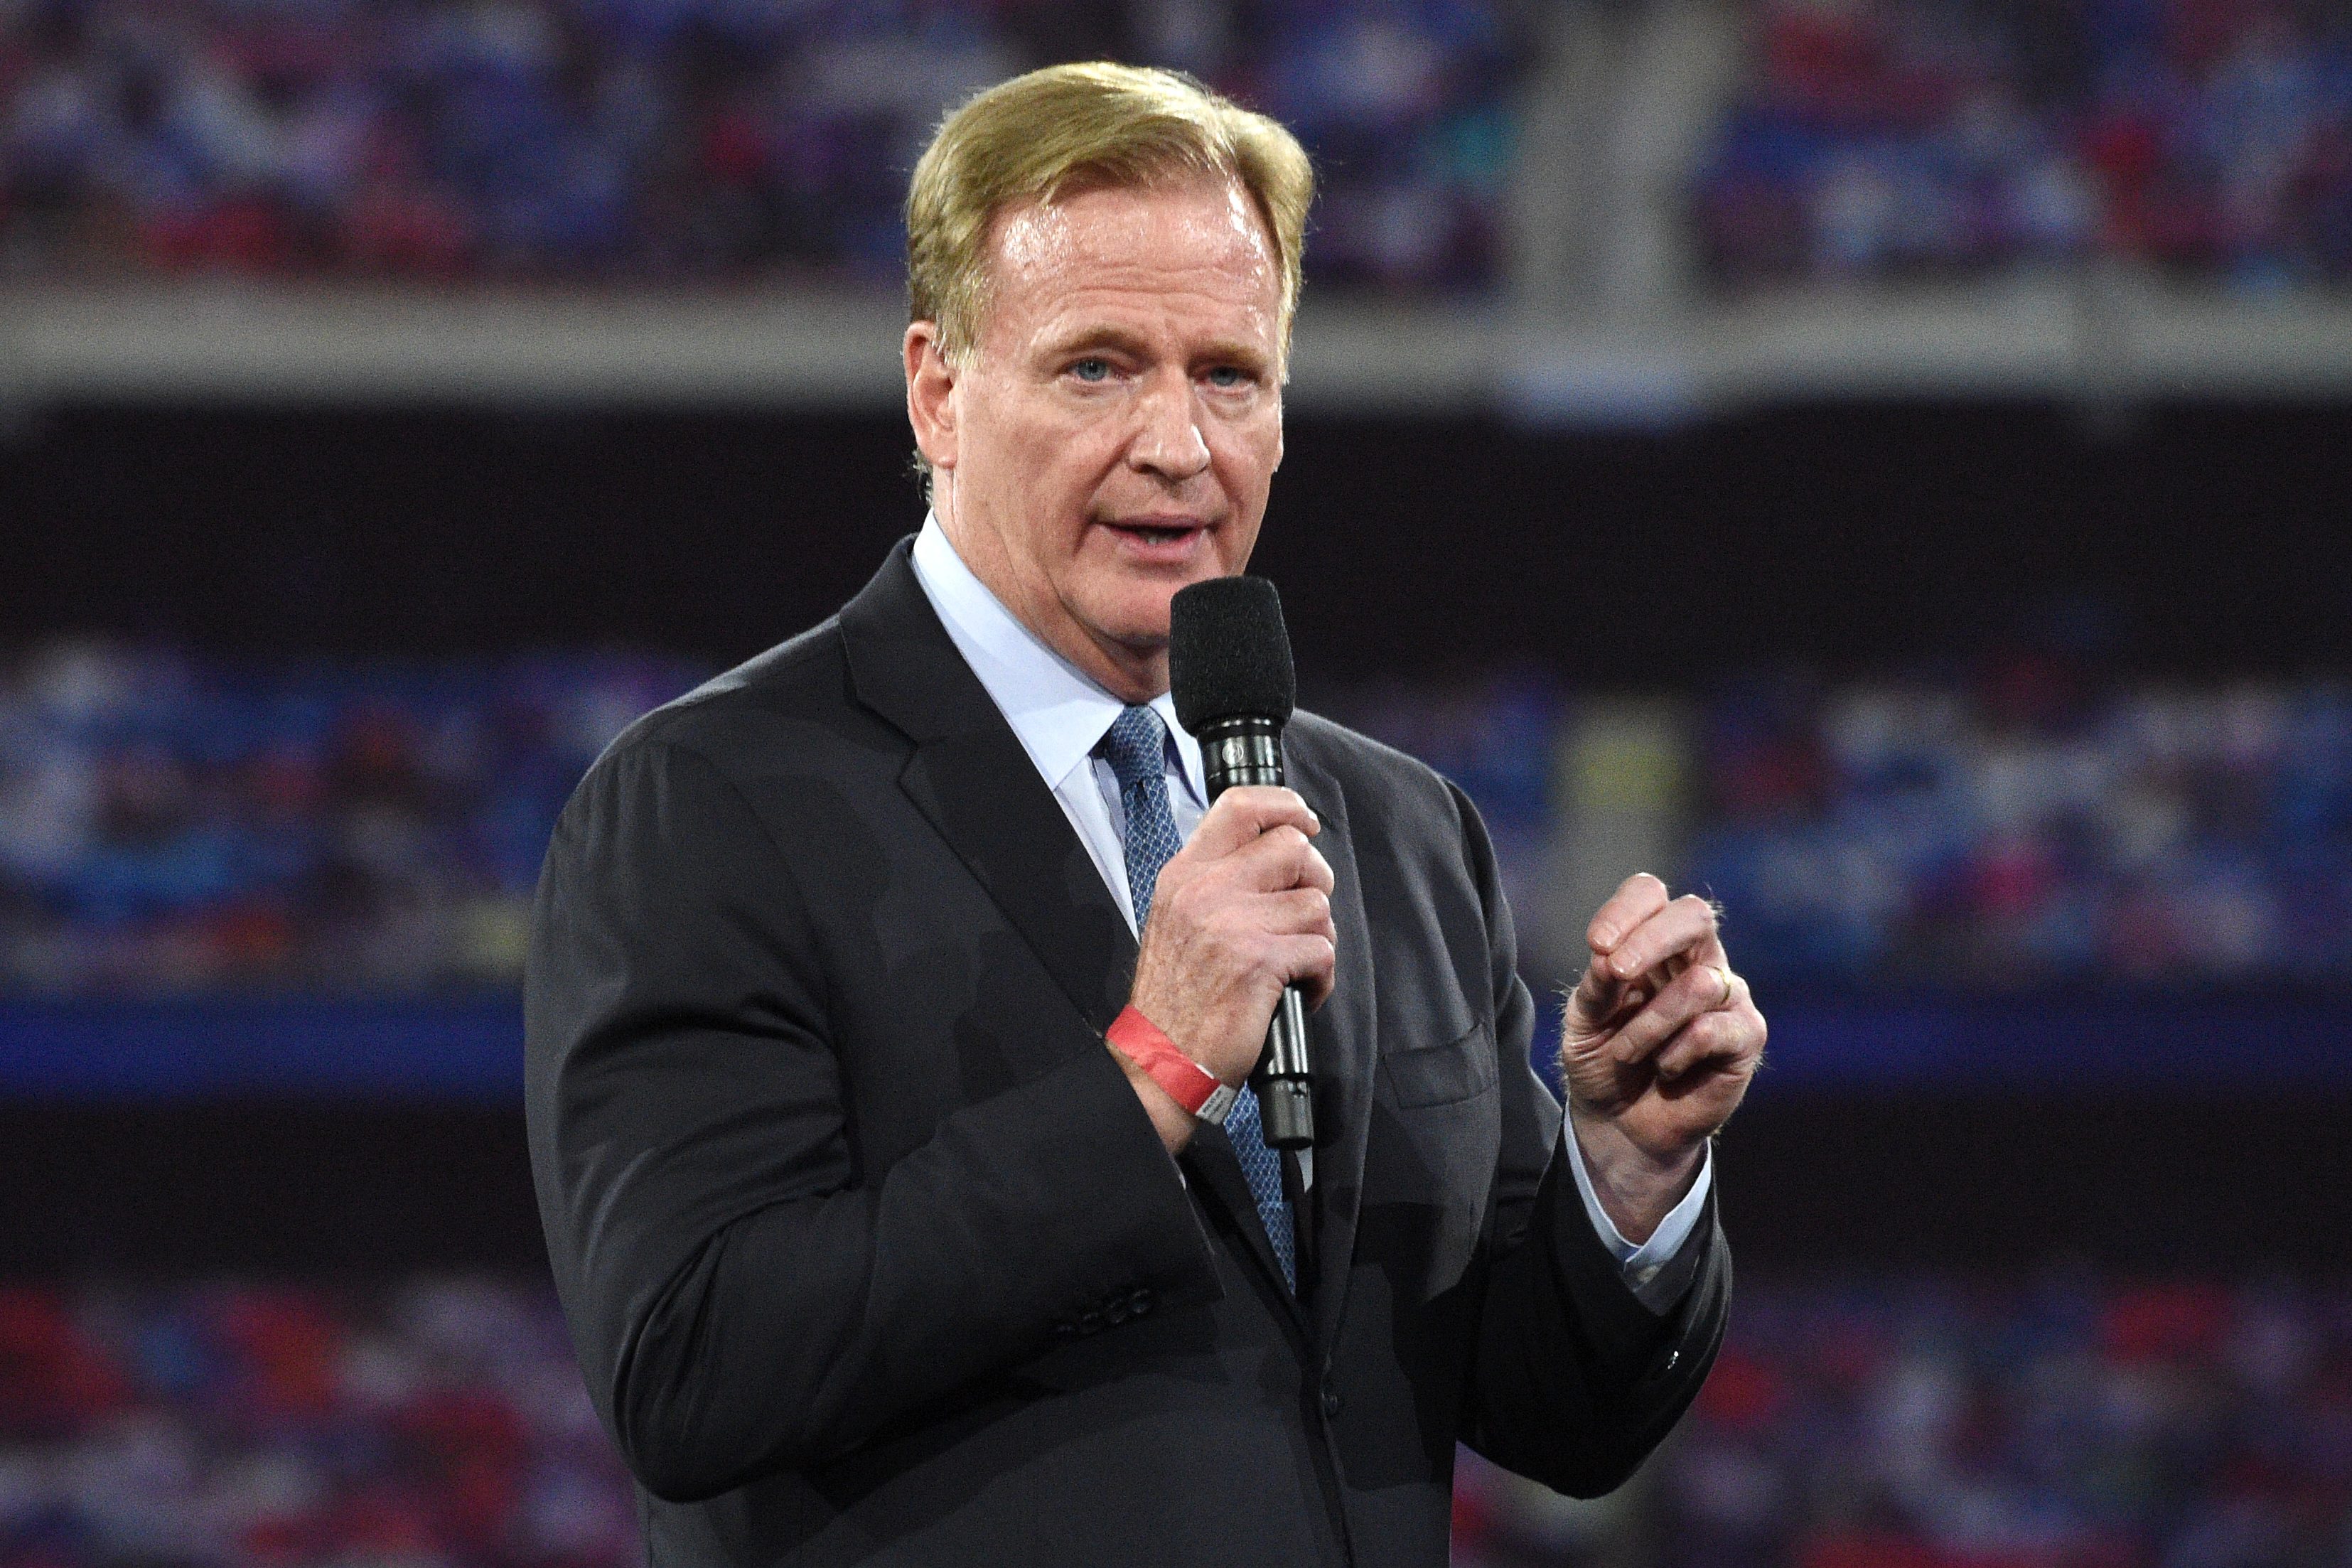 NFL Commissioner Roger Goodell Makes More Per Year Than Patrick Mahomes and the CEO of Netflix